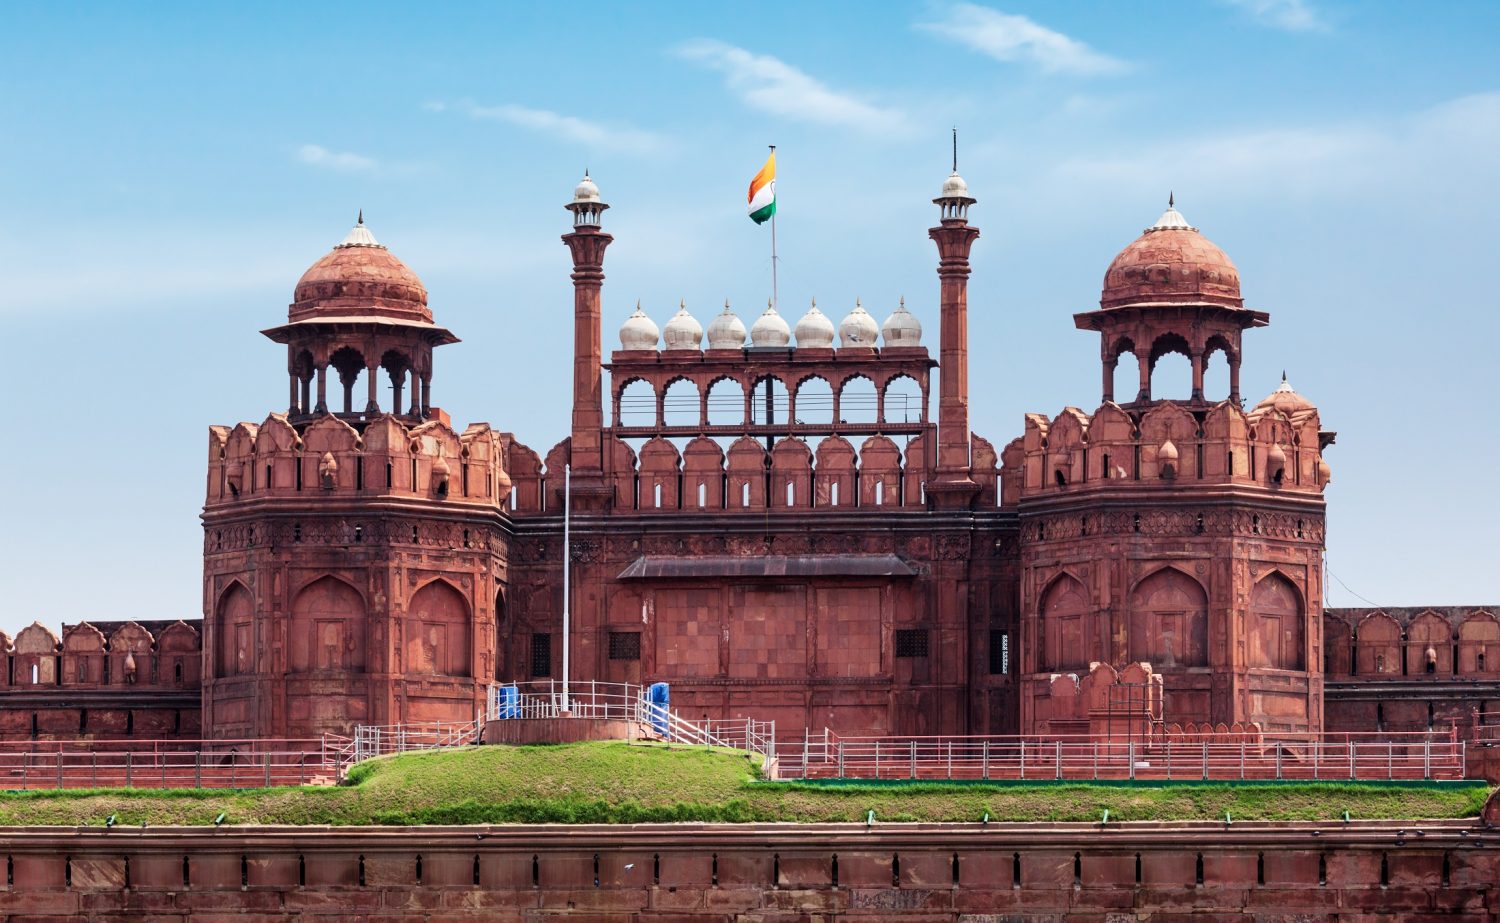 4 Historical Sites in Delhi that will Take your Breath Away - NCL Travel